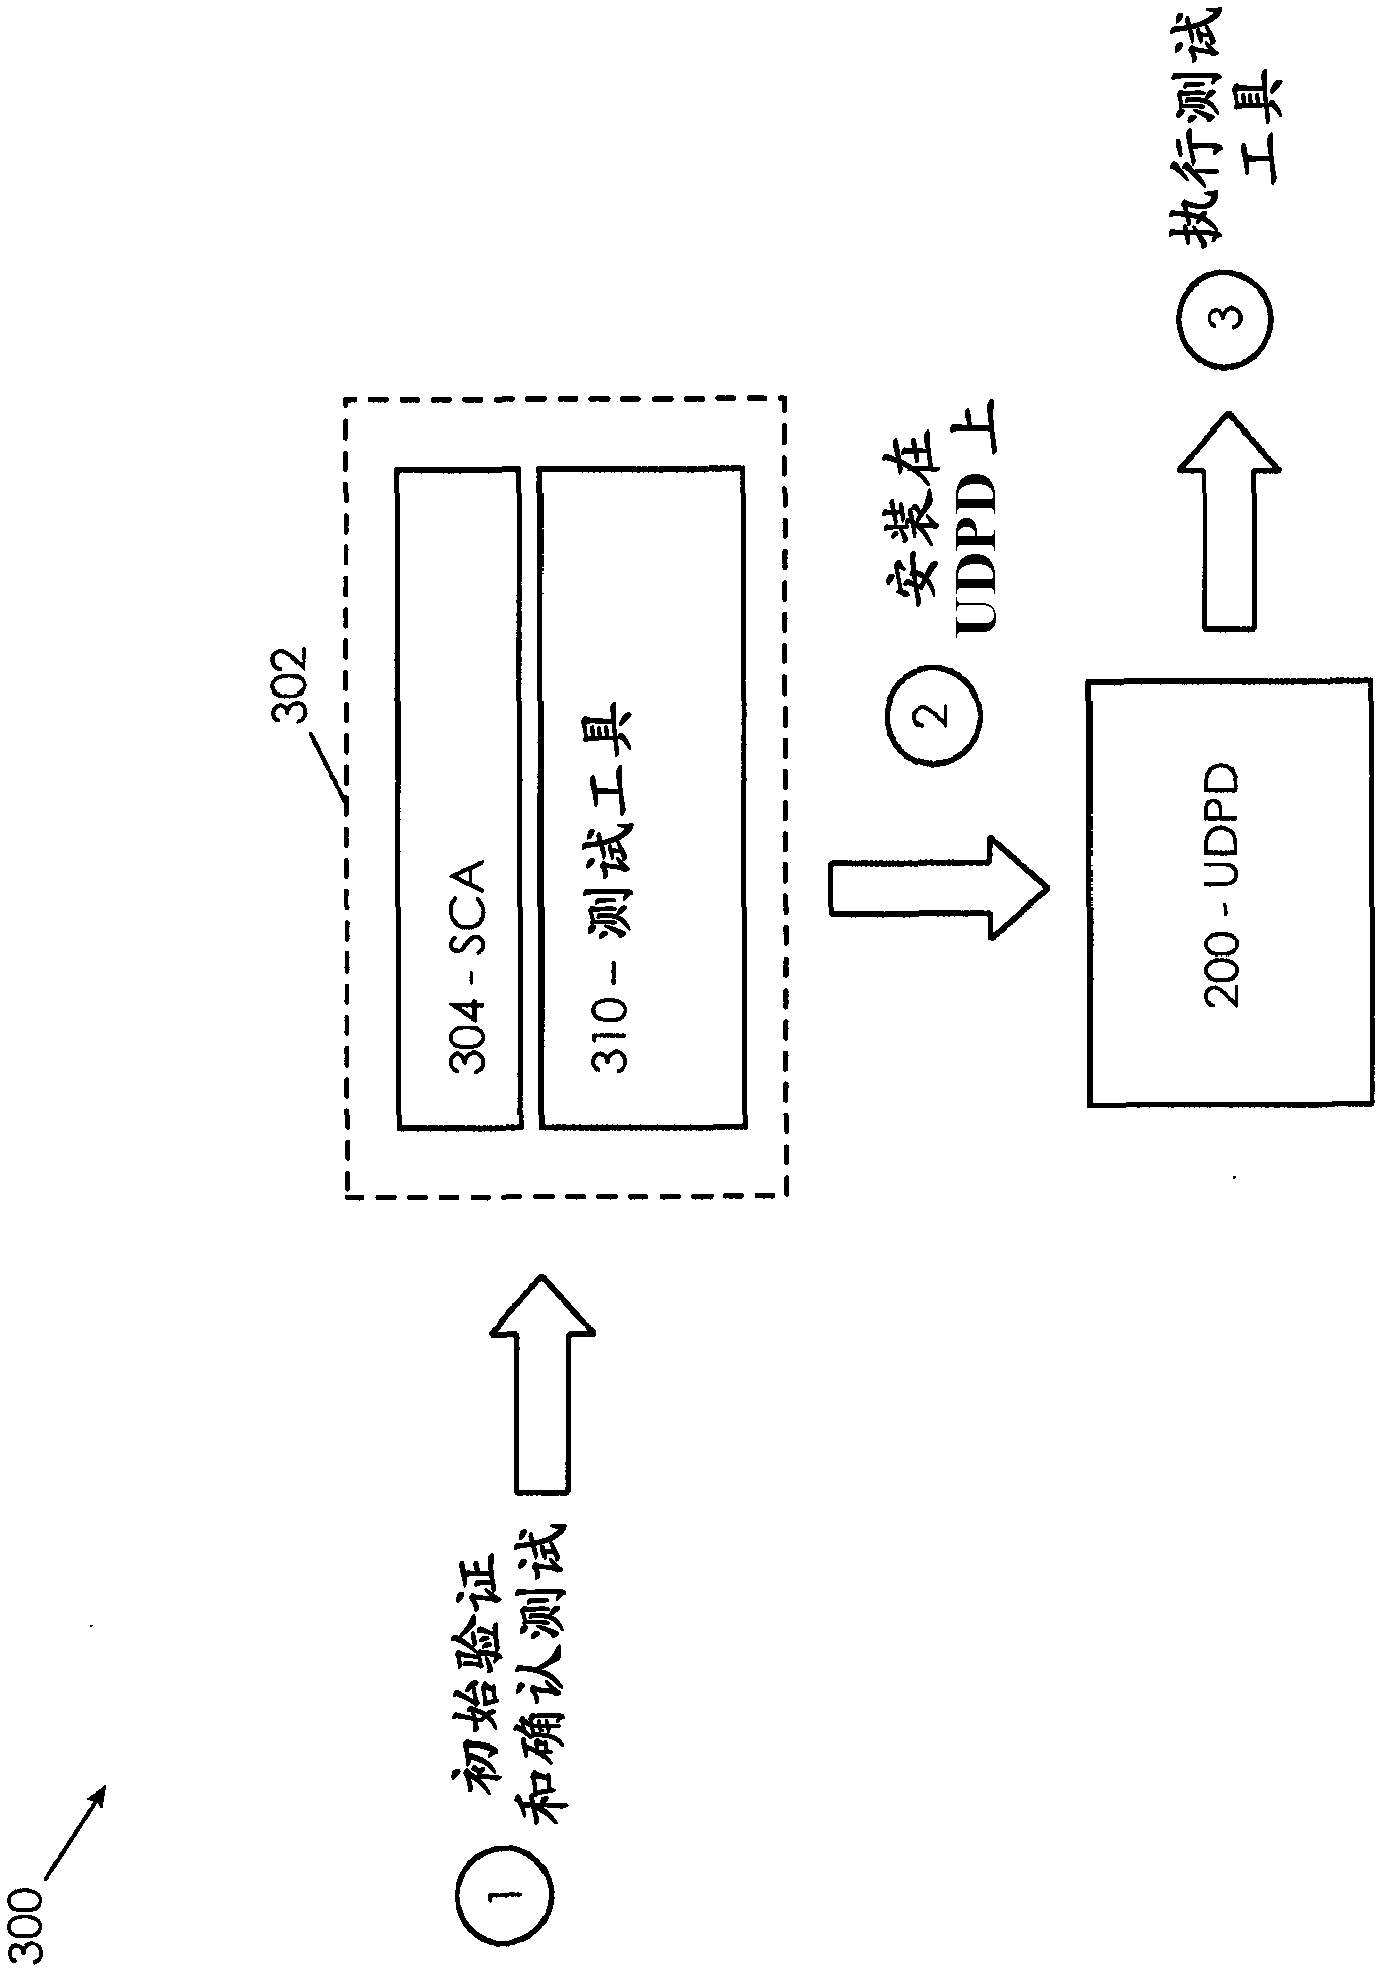 Methods and articles of manufacture for hosting a safety critical application on an uncontrolled data processing device